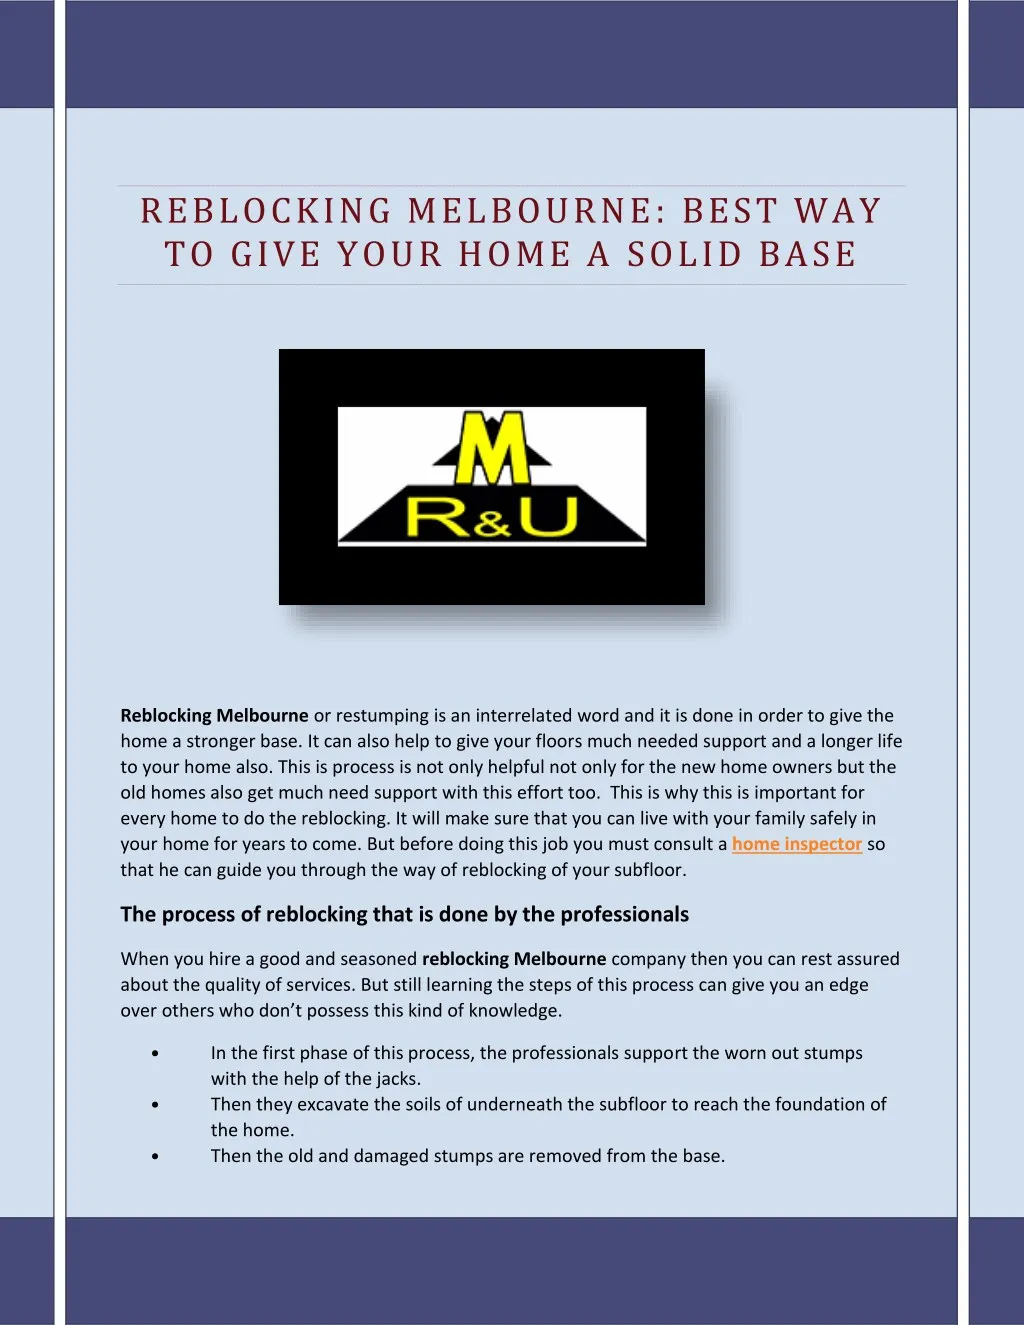 reblocking melbourne best way to give your home